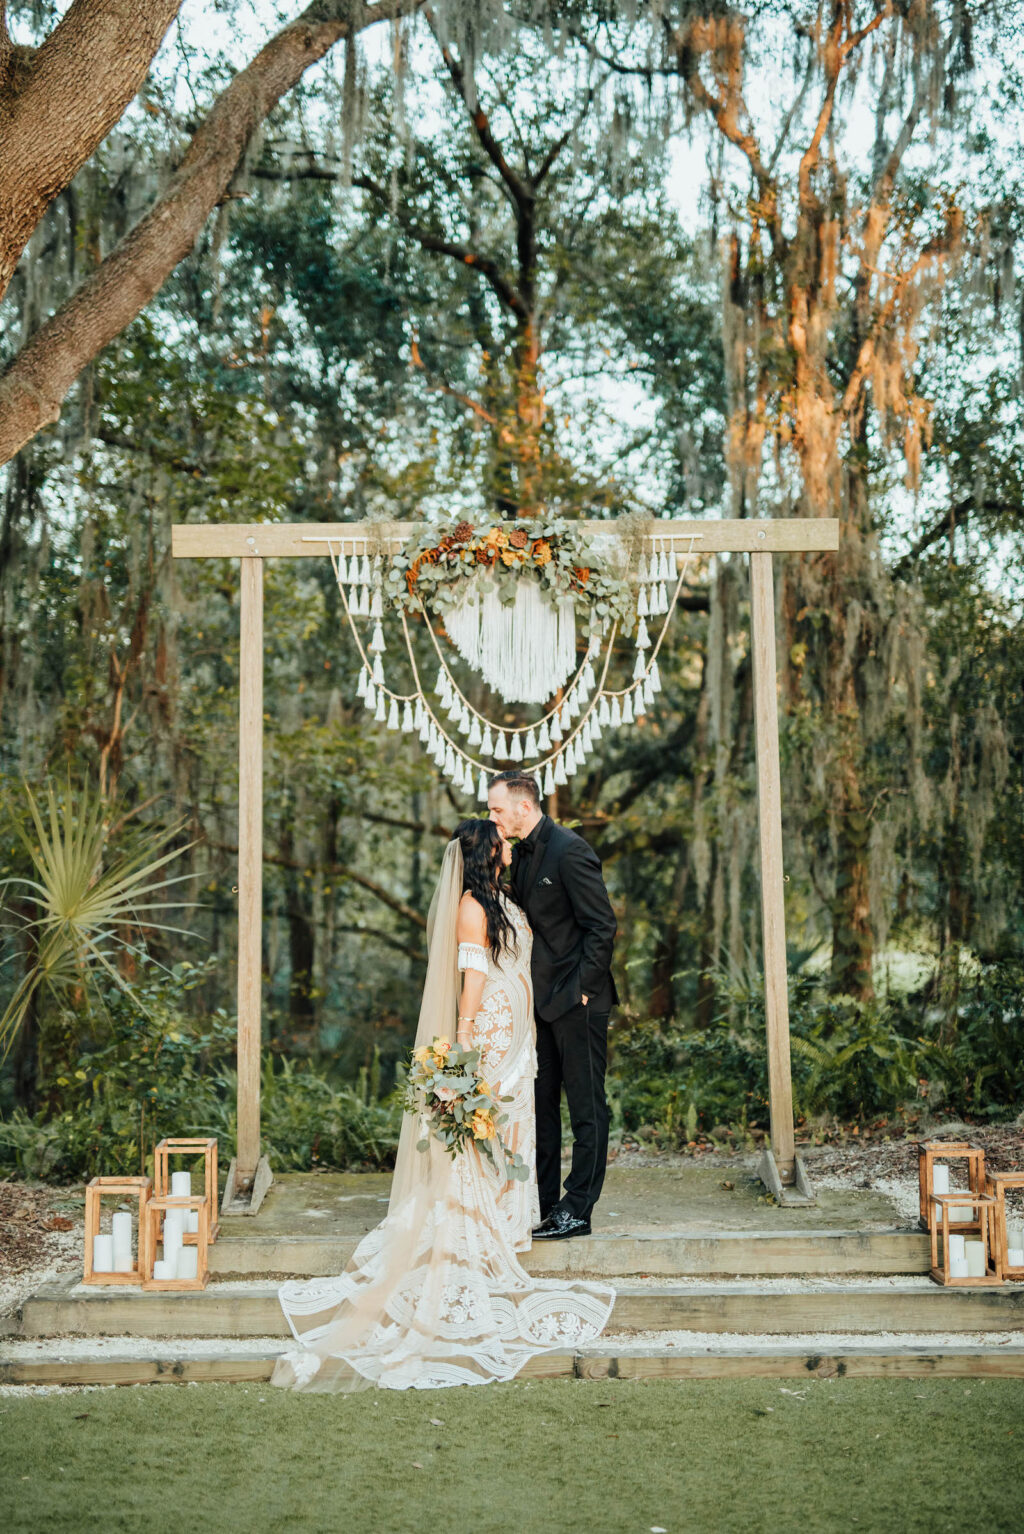 Bride and Groom Portrait | Outdoor Bohemian Wedding Ceremony with White Garden Chairs | Wooden Arch with Macrame Crochet Decor | Tampa Wedding Venue Paradise Springs